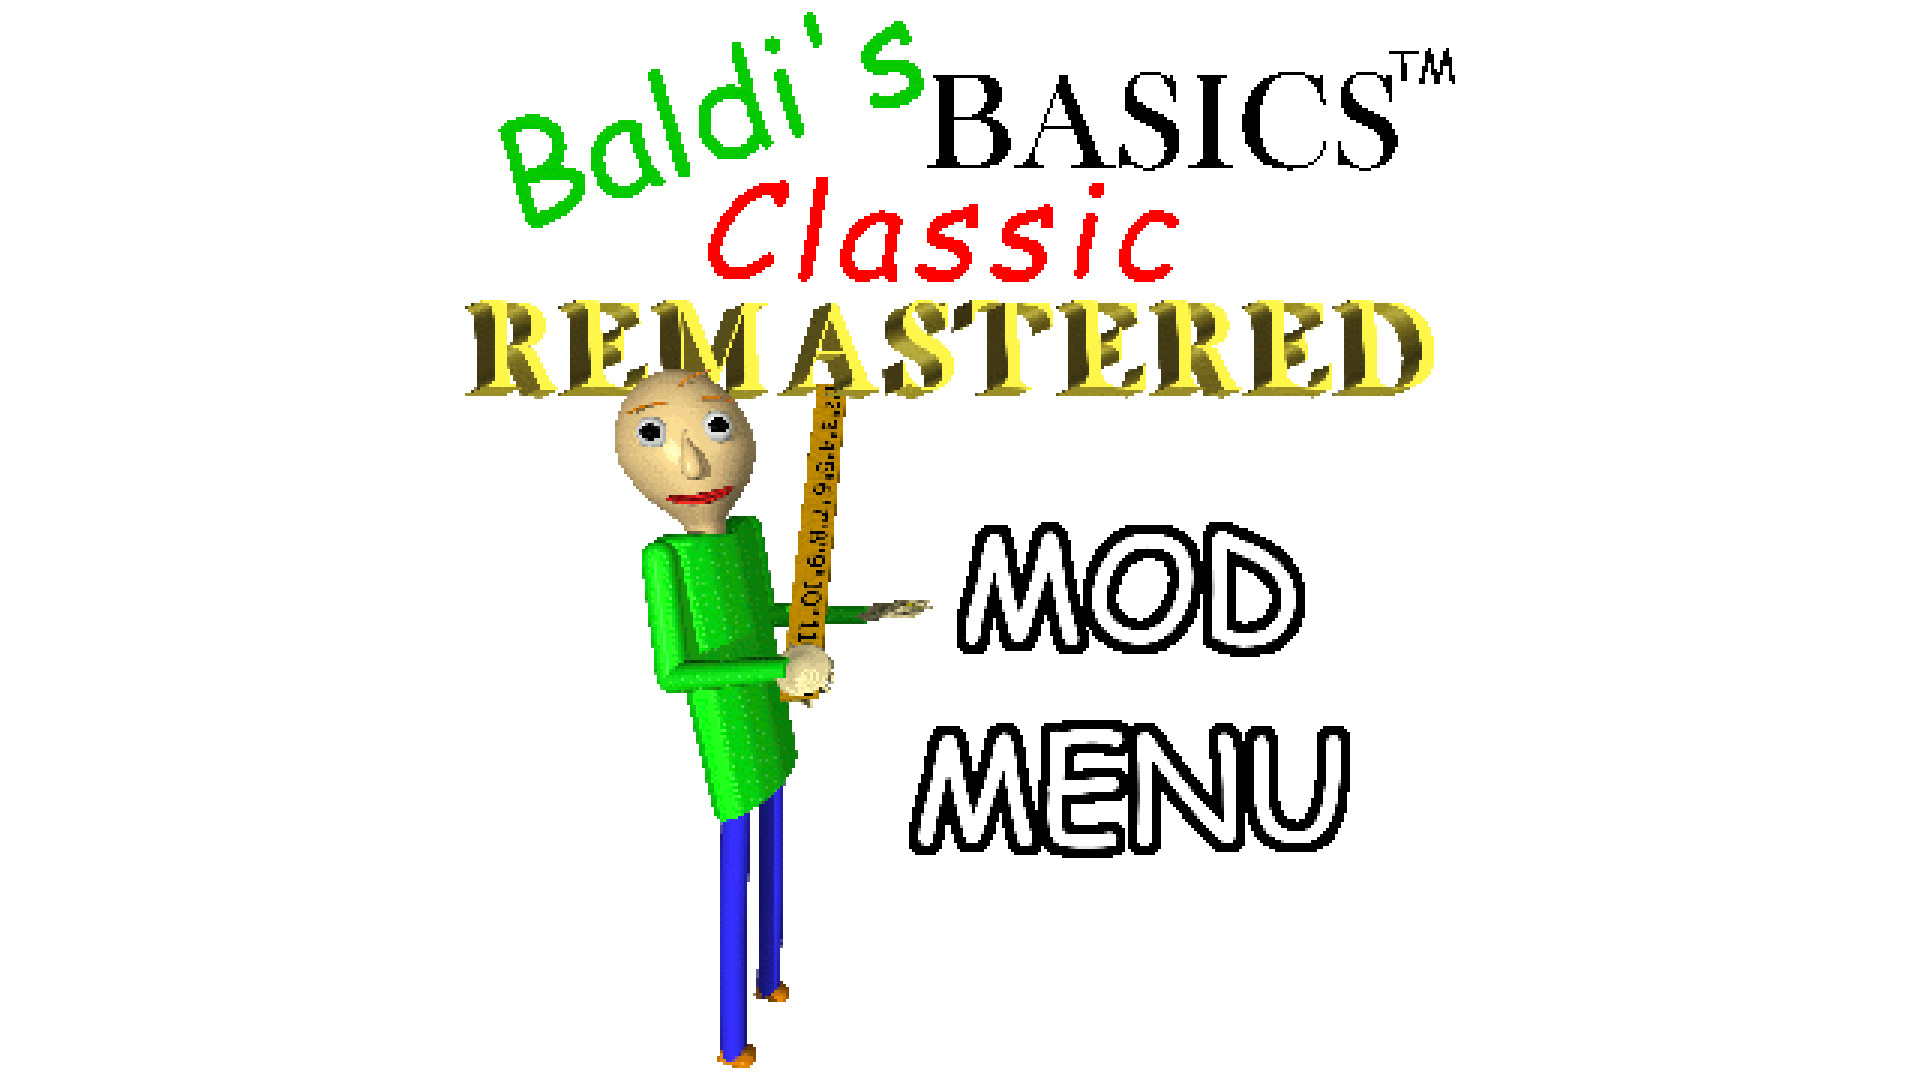 How To Download Baldi's Basics Mod Menu from baldi basics mod menu download  windows Watch Video 